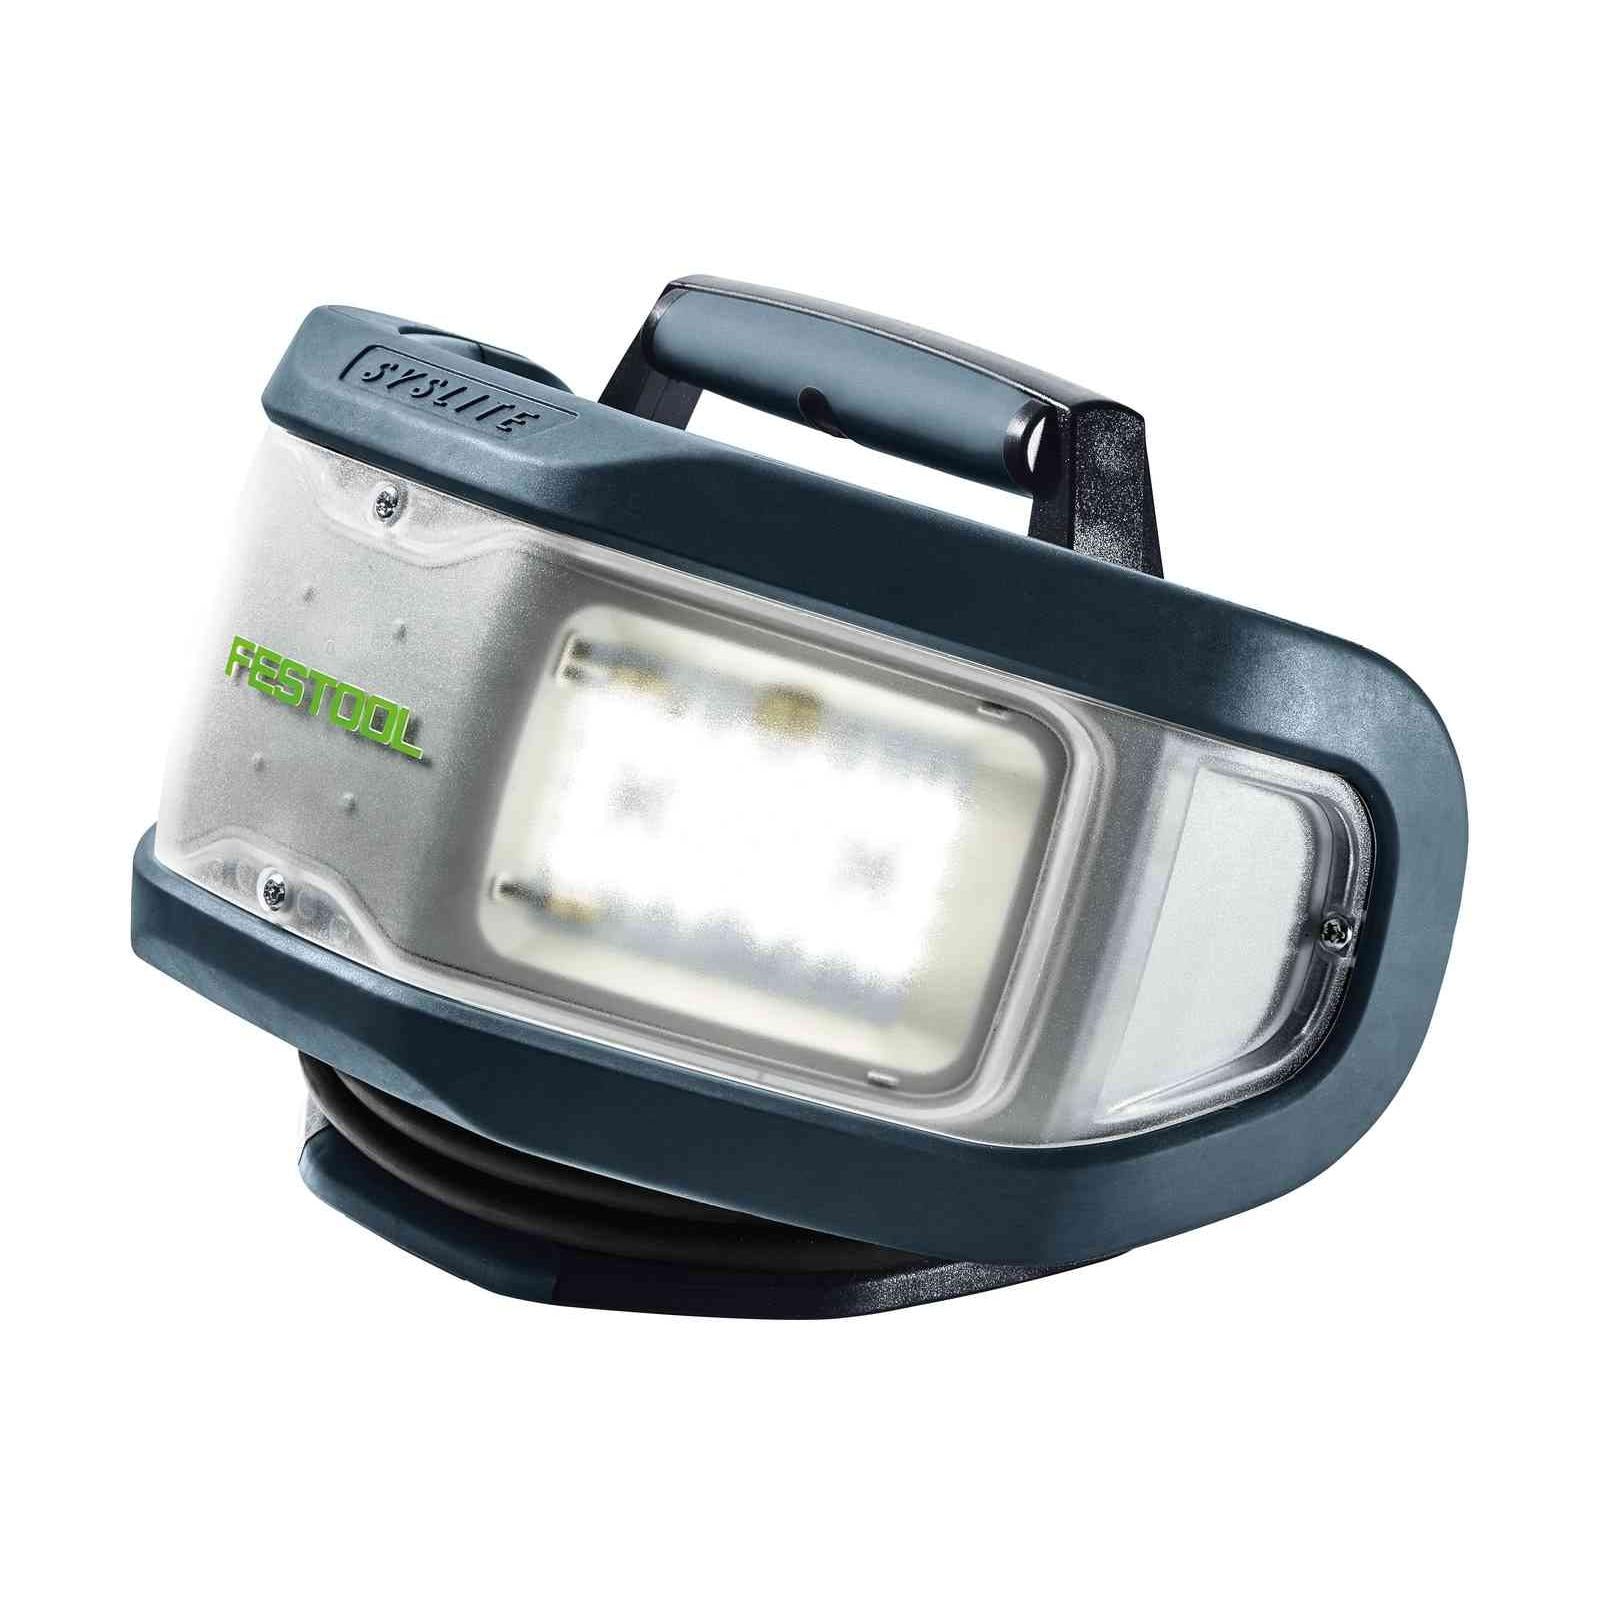 Festool Working light SYSLITE DUO 200164 Power Tool Services